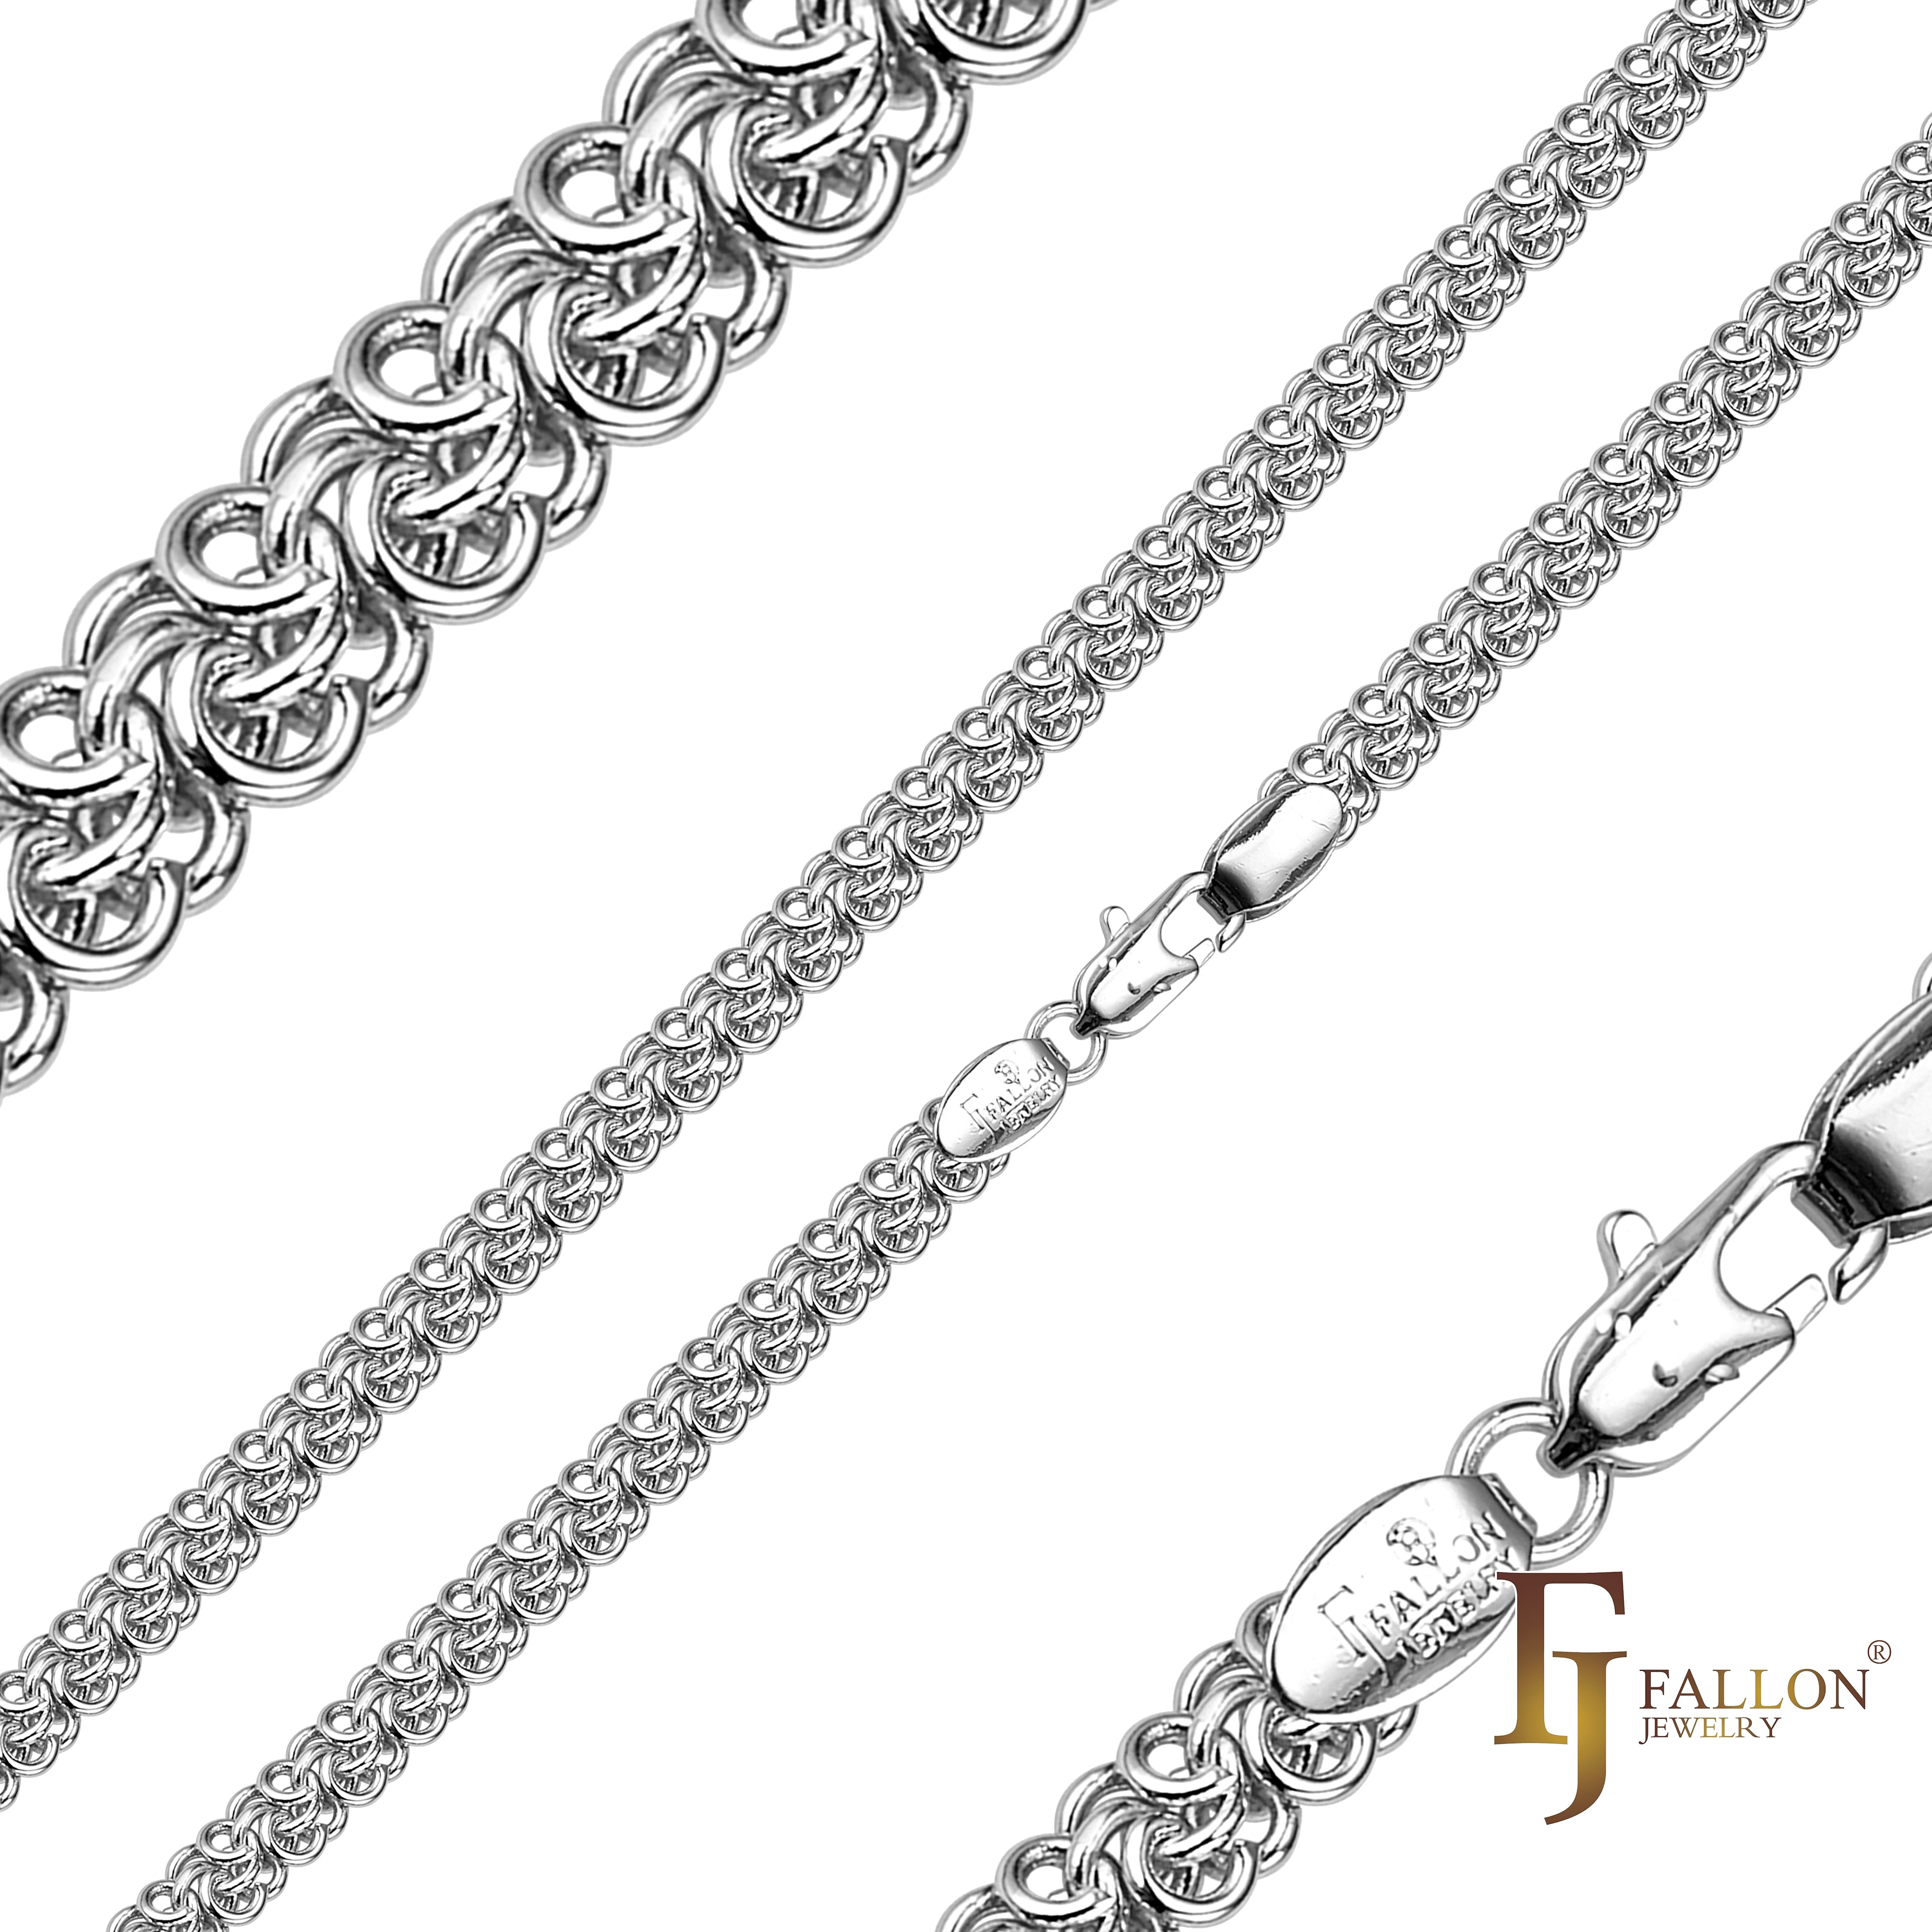 Bismarck triple rolo link chains plated in White Gold, 14K Gold, Rose Gold, two tone